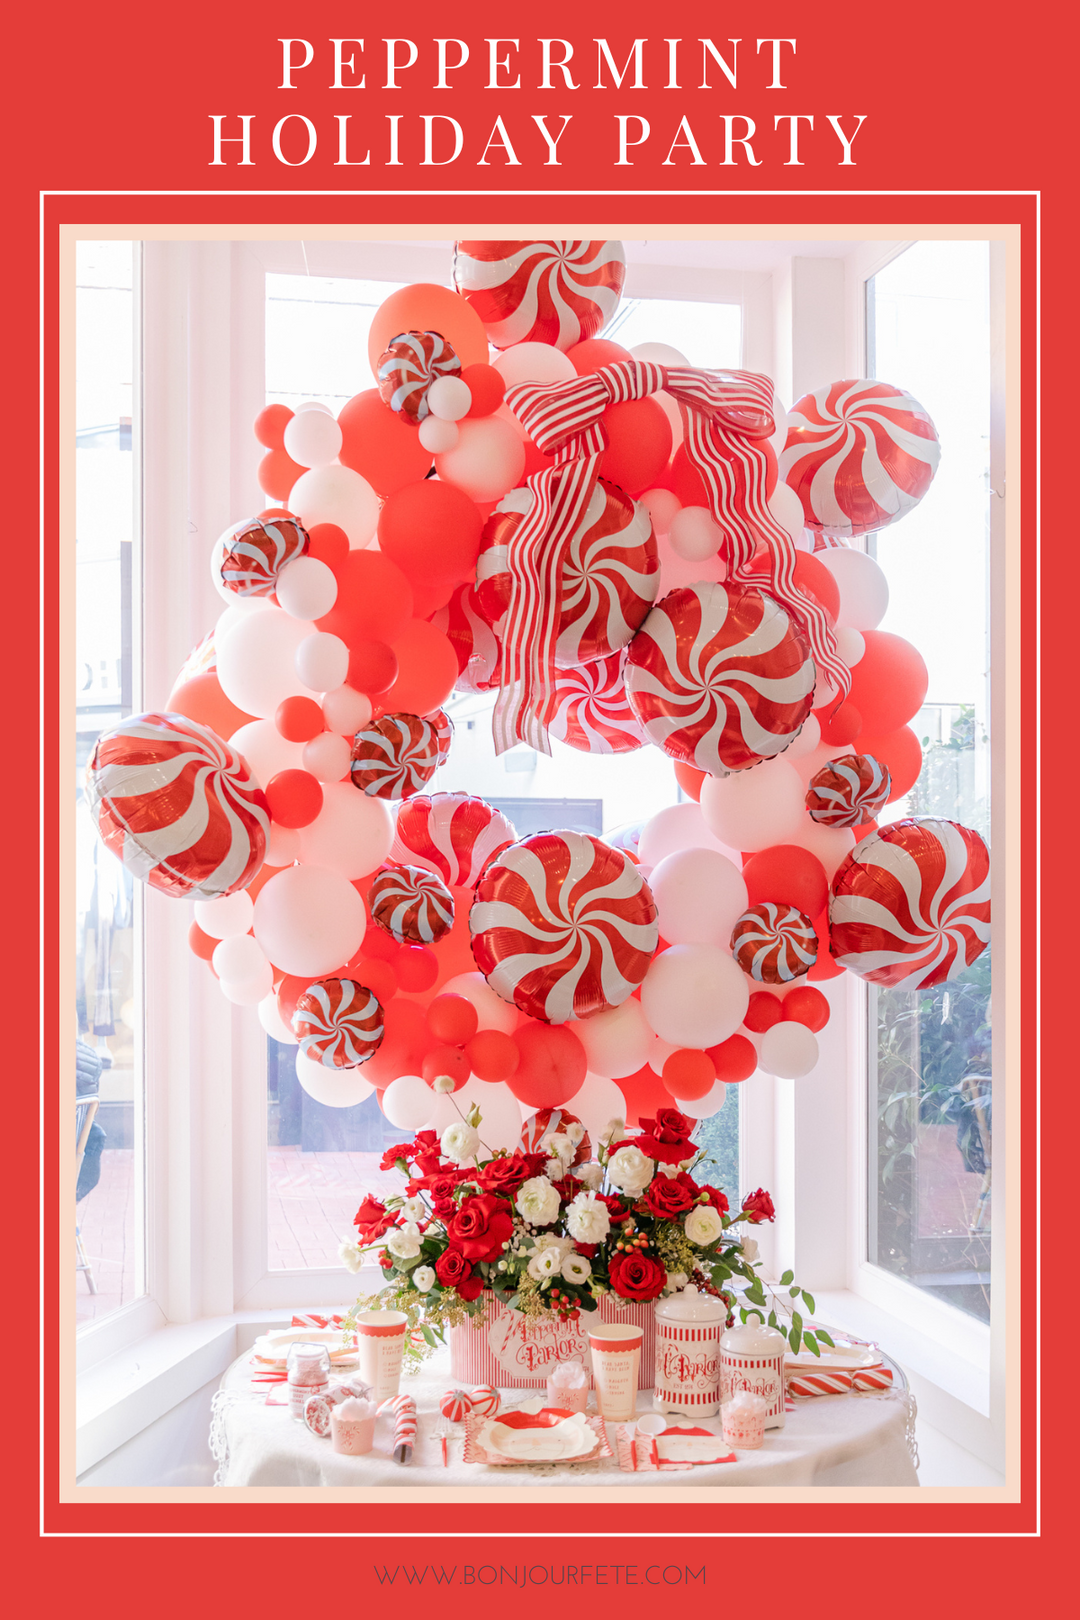 PINK PEPPERMINT CHRISTMAS PARTY IDEAS & DECORATIONS